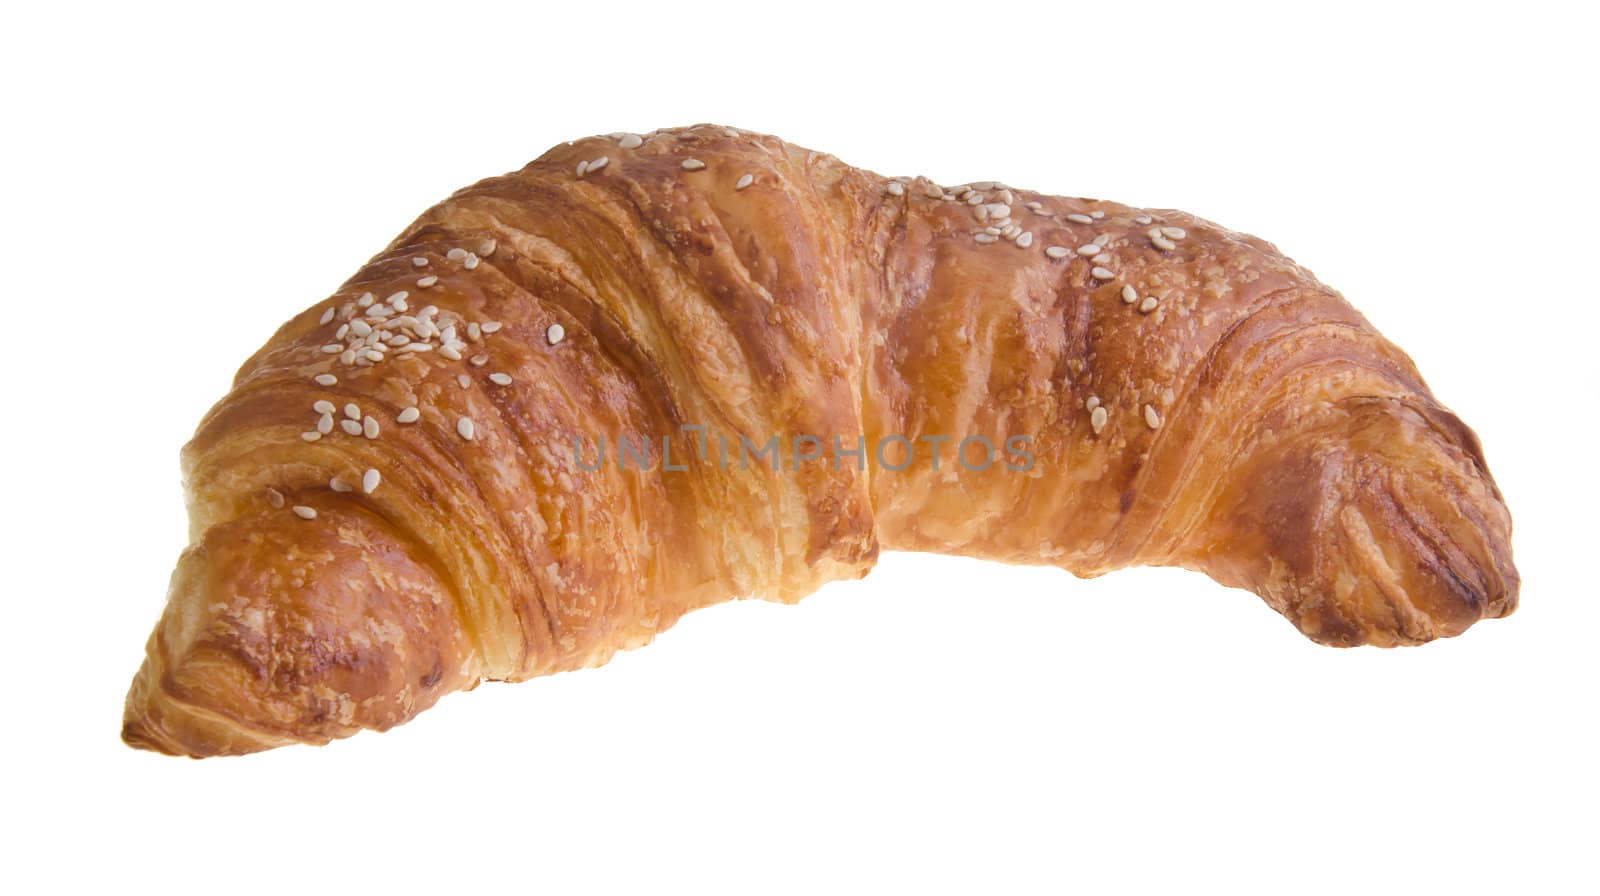 croissant. Fresh and tasty croissant over white background by heinteh